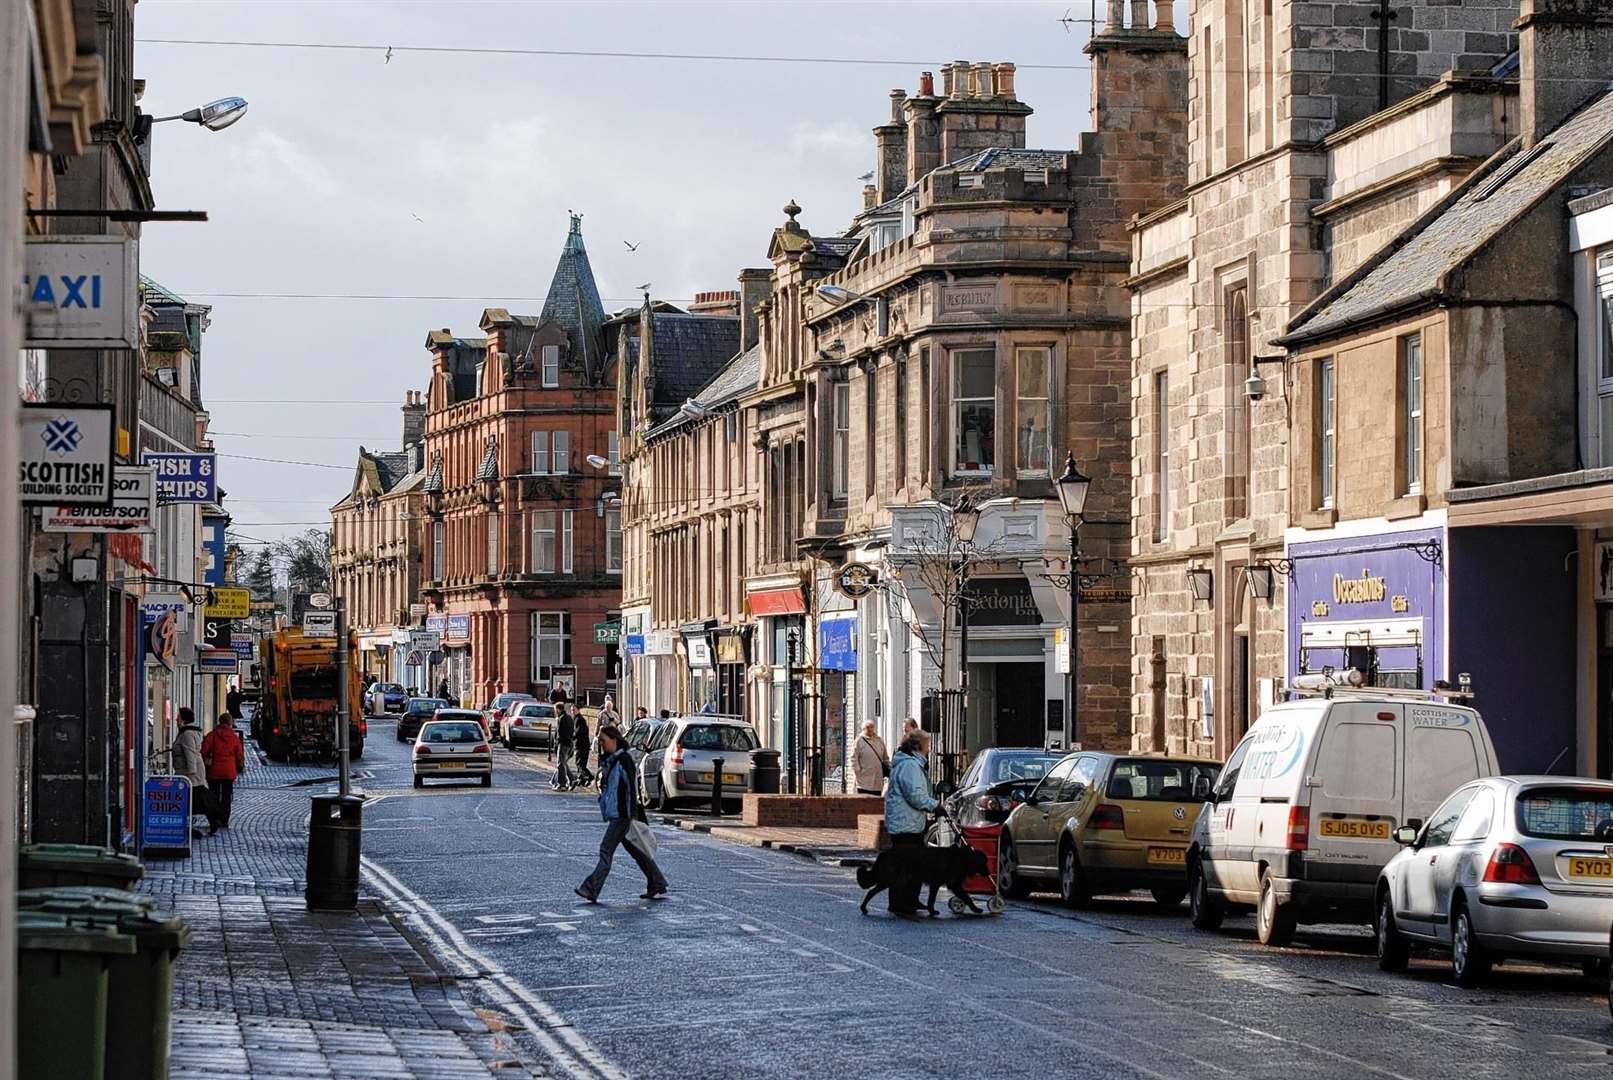 Nairn High Street has several independent businesses.